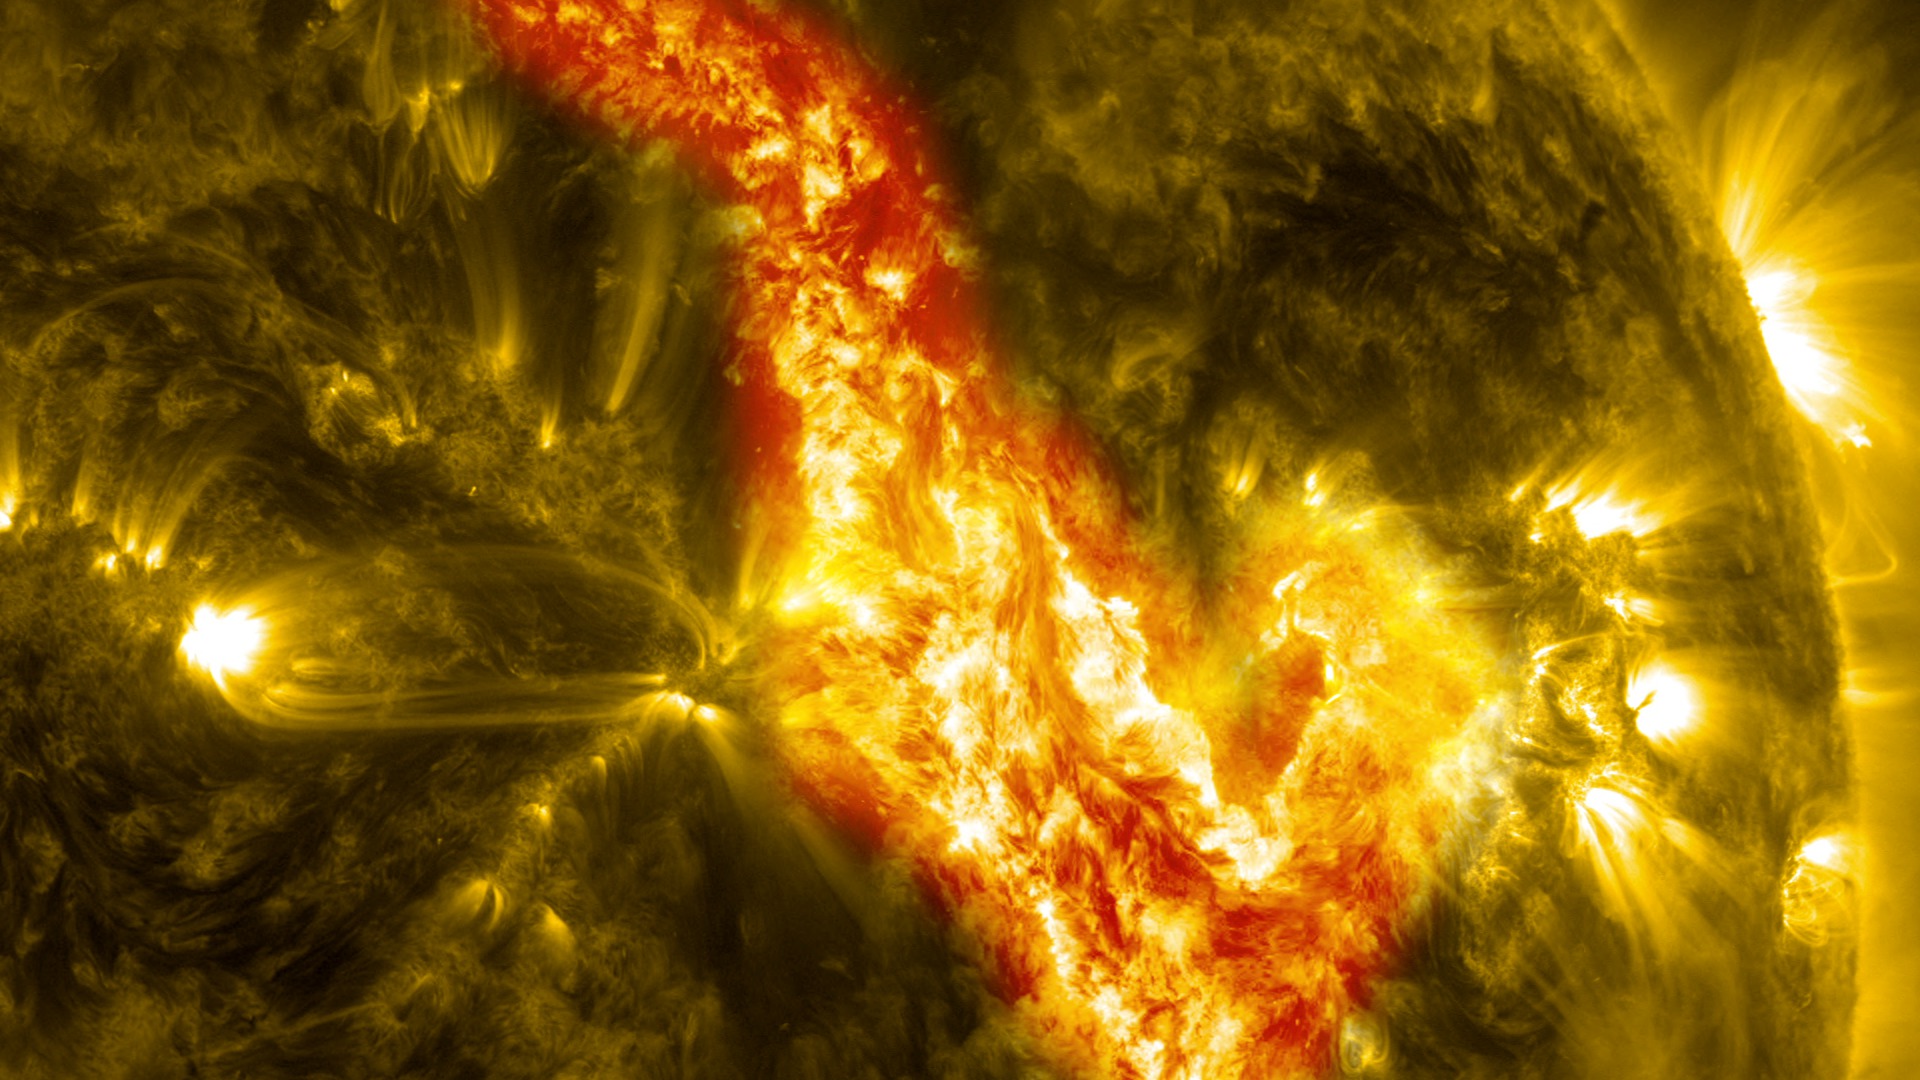 Preview Image for Filament Eruption Creates 'Canyon of Fire' on the Sun